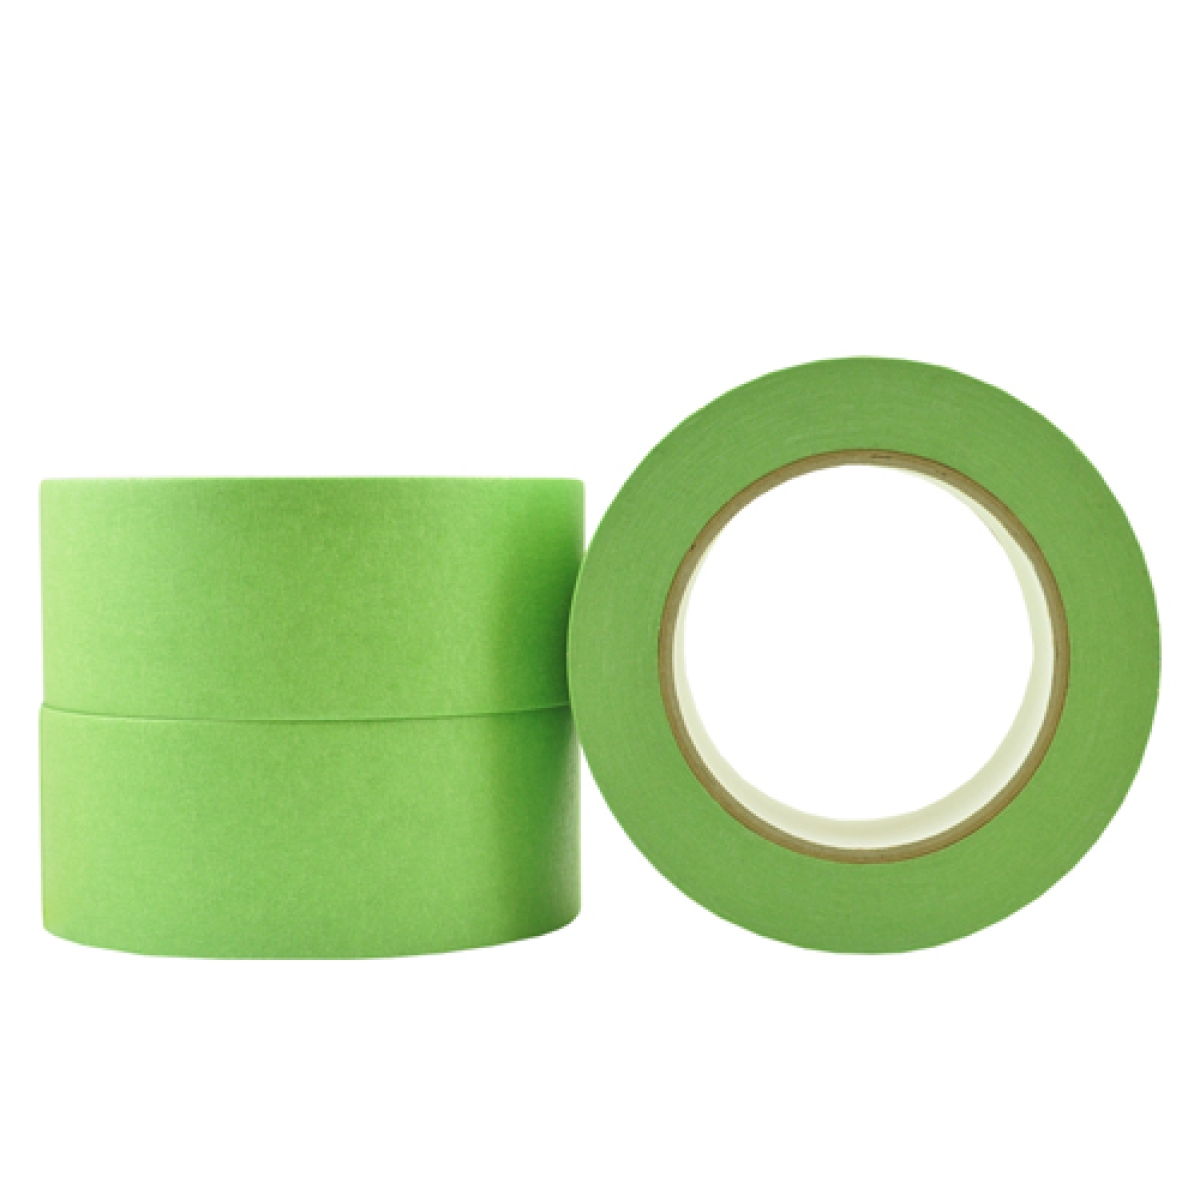 Green Professional Painters Crepe Rubber Masking Tape S239